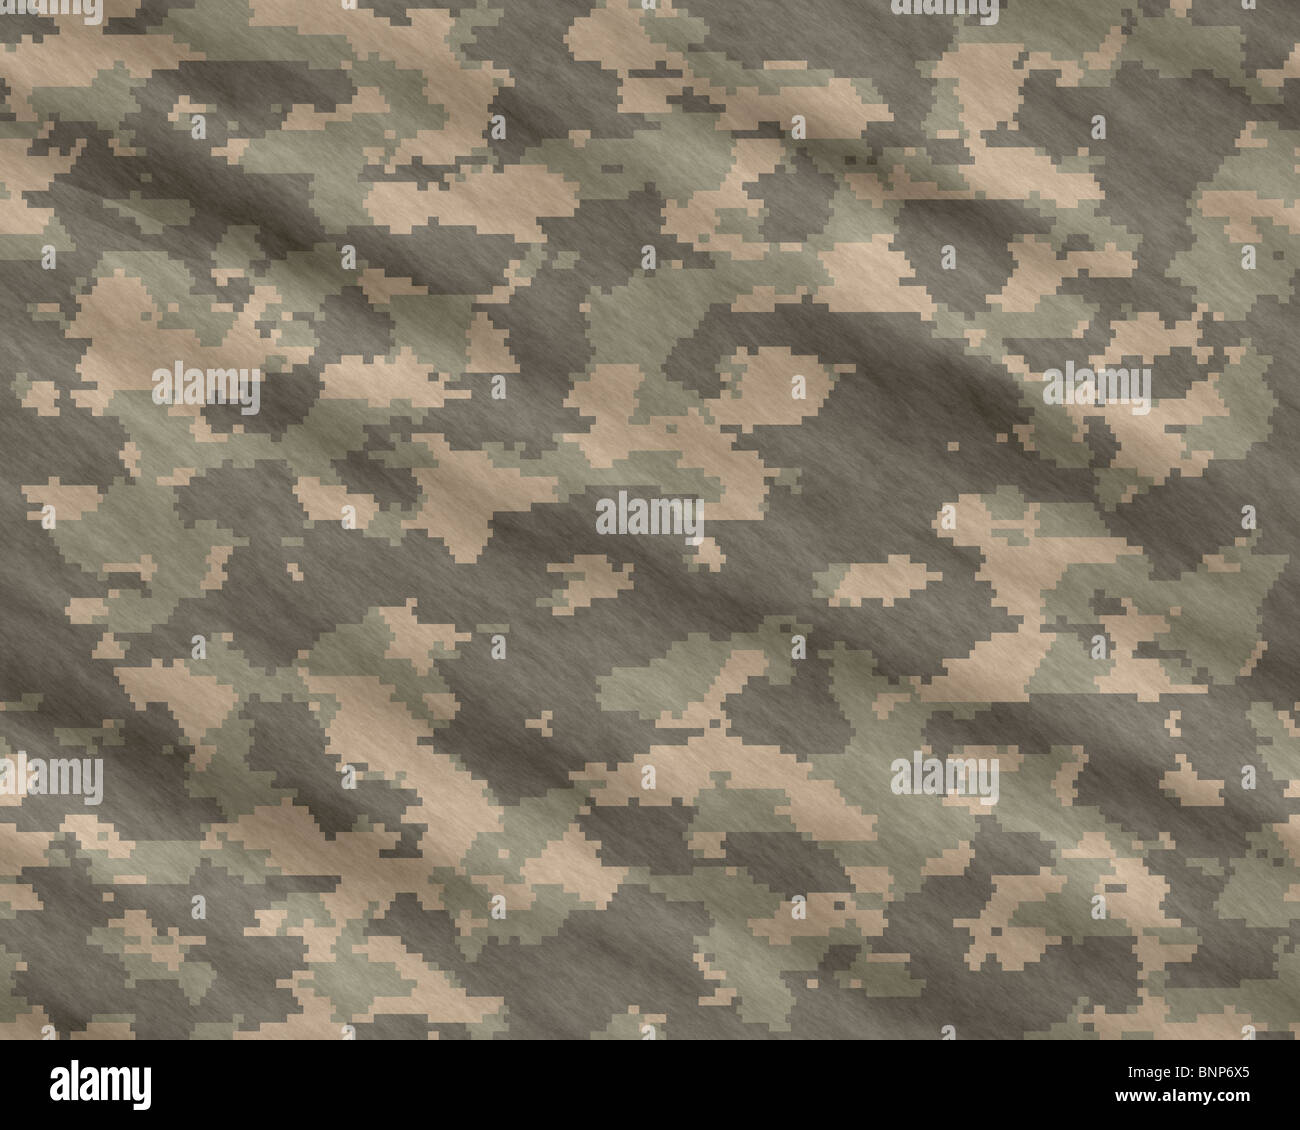 a modern digital camoflage pattern material background Stock Photo